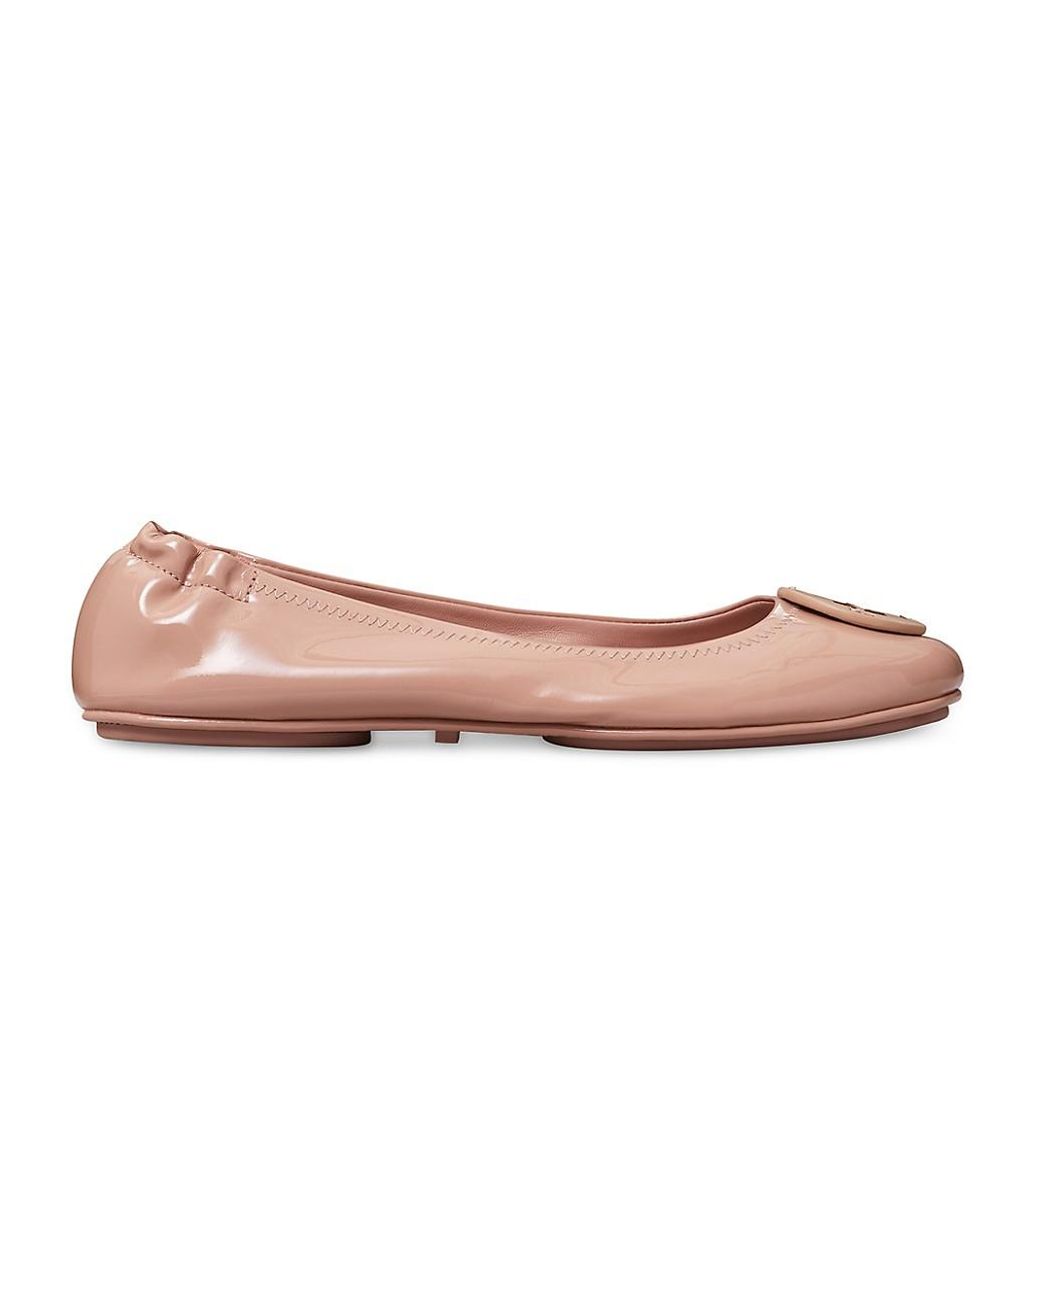 Tory Burch Minnie Patent-leather Travel Ballet Flats in Pink | Lyst